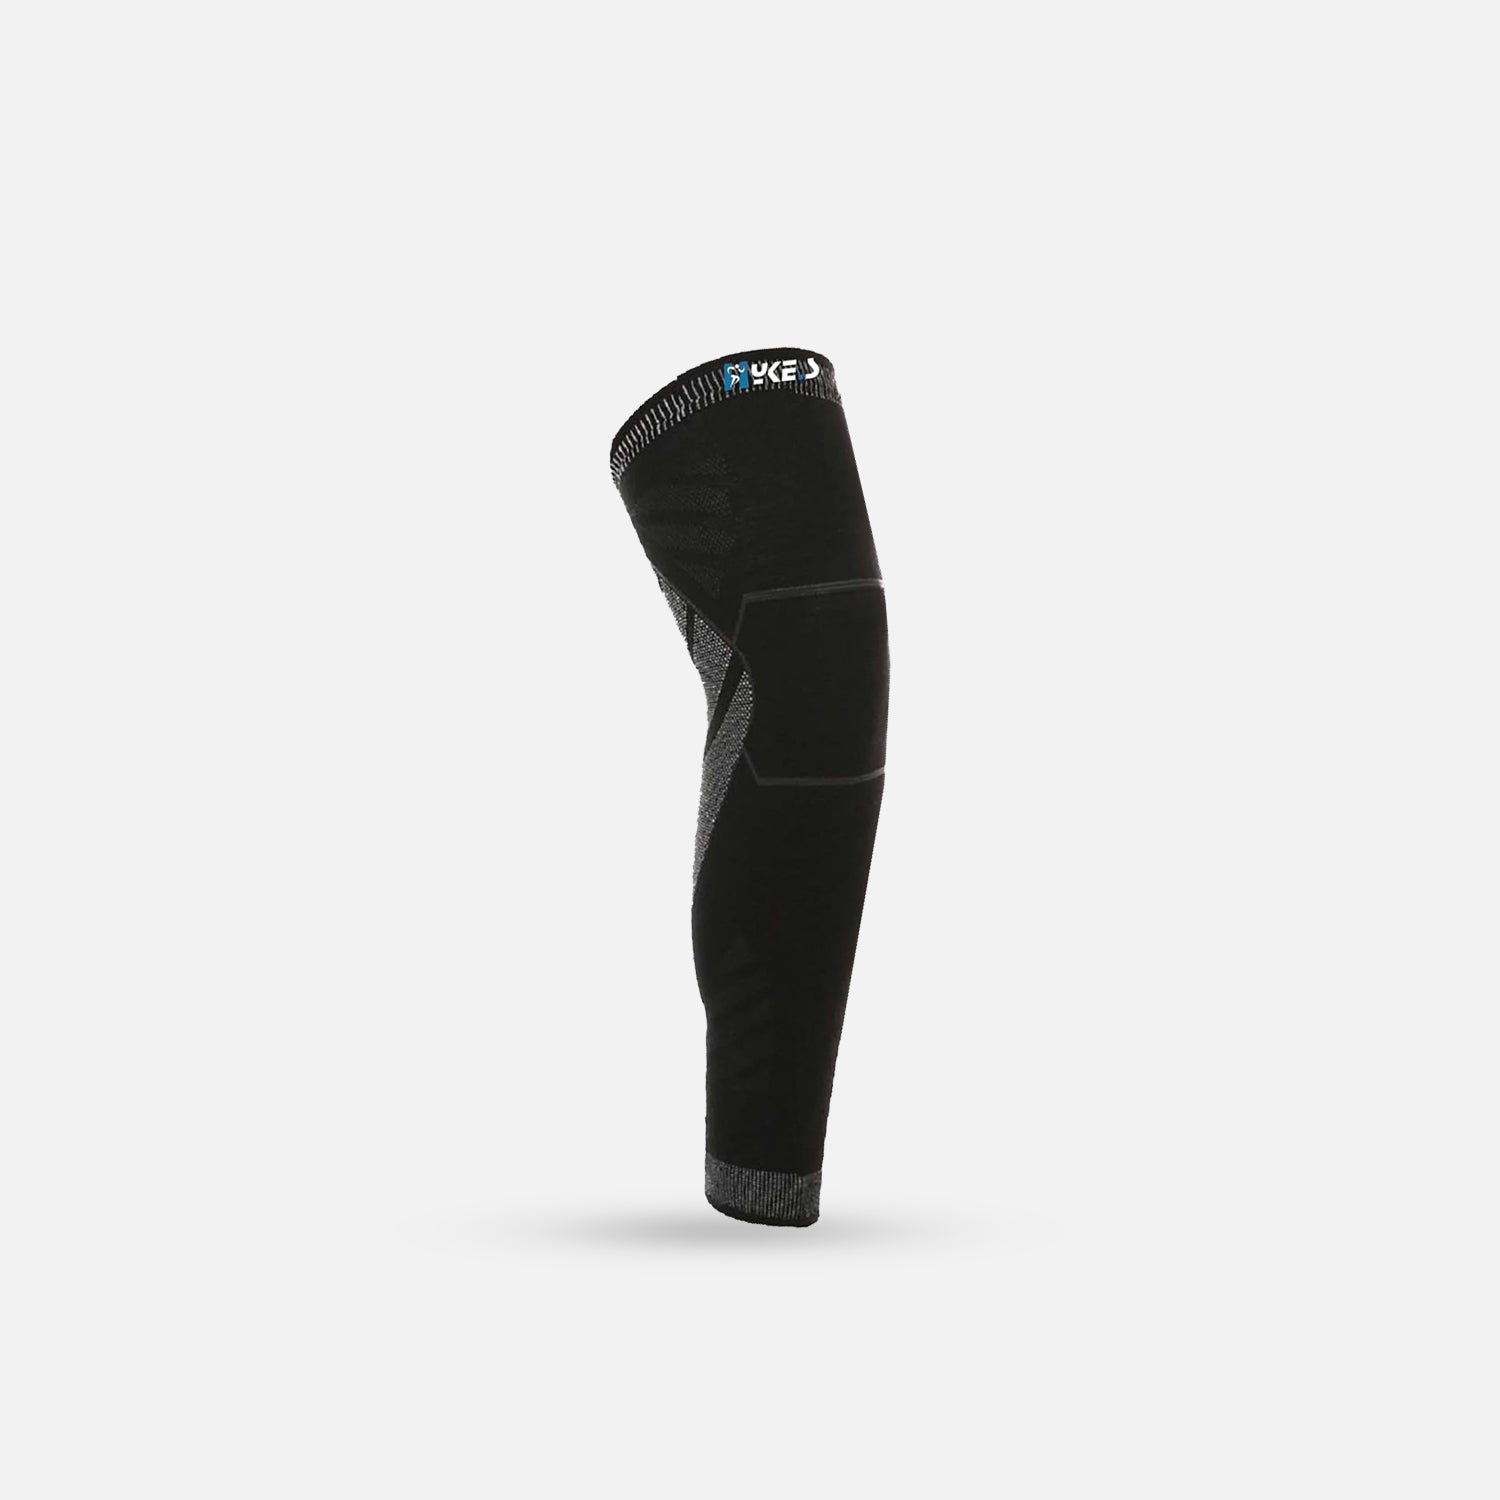 Sintege 3 Pairs Calf Compression Sleeves for Men And Women India